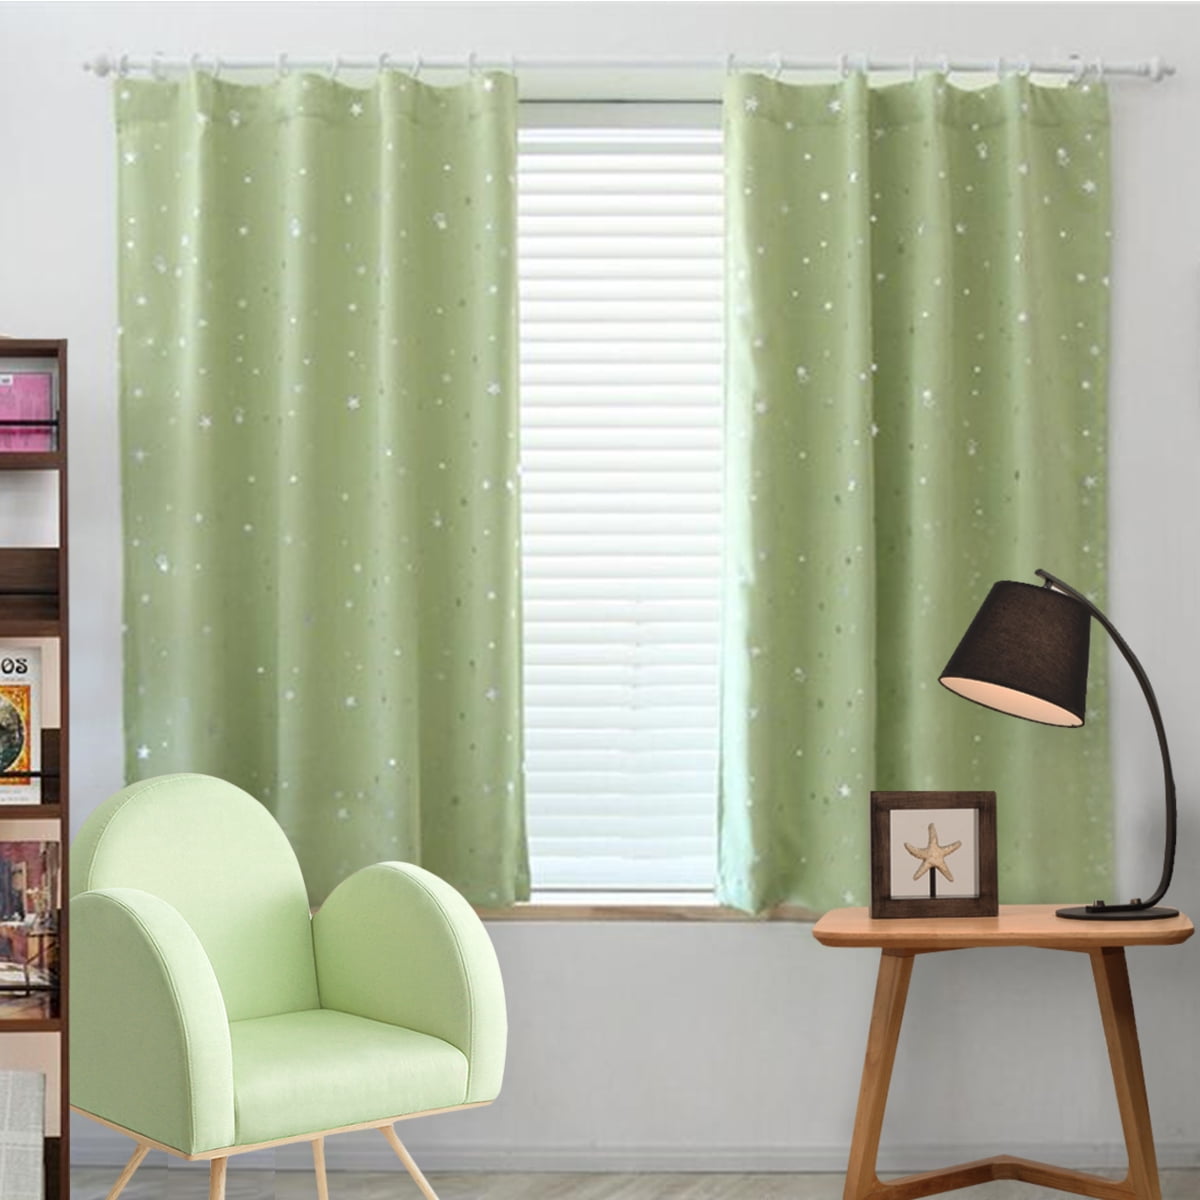 Kids Boy Girls Star Window Blackout Curtains Room Thermal Insulated Drapes1 Pcs 